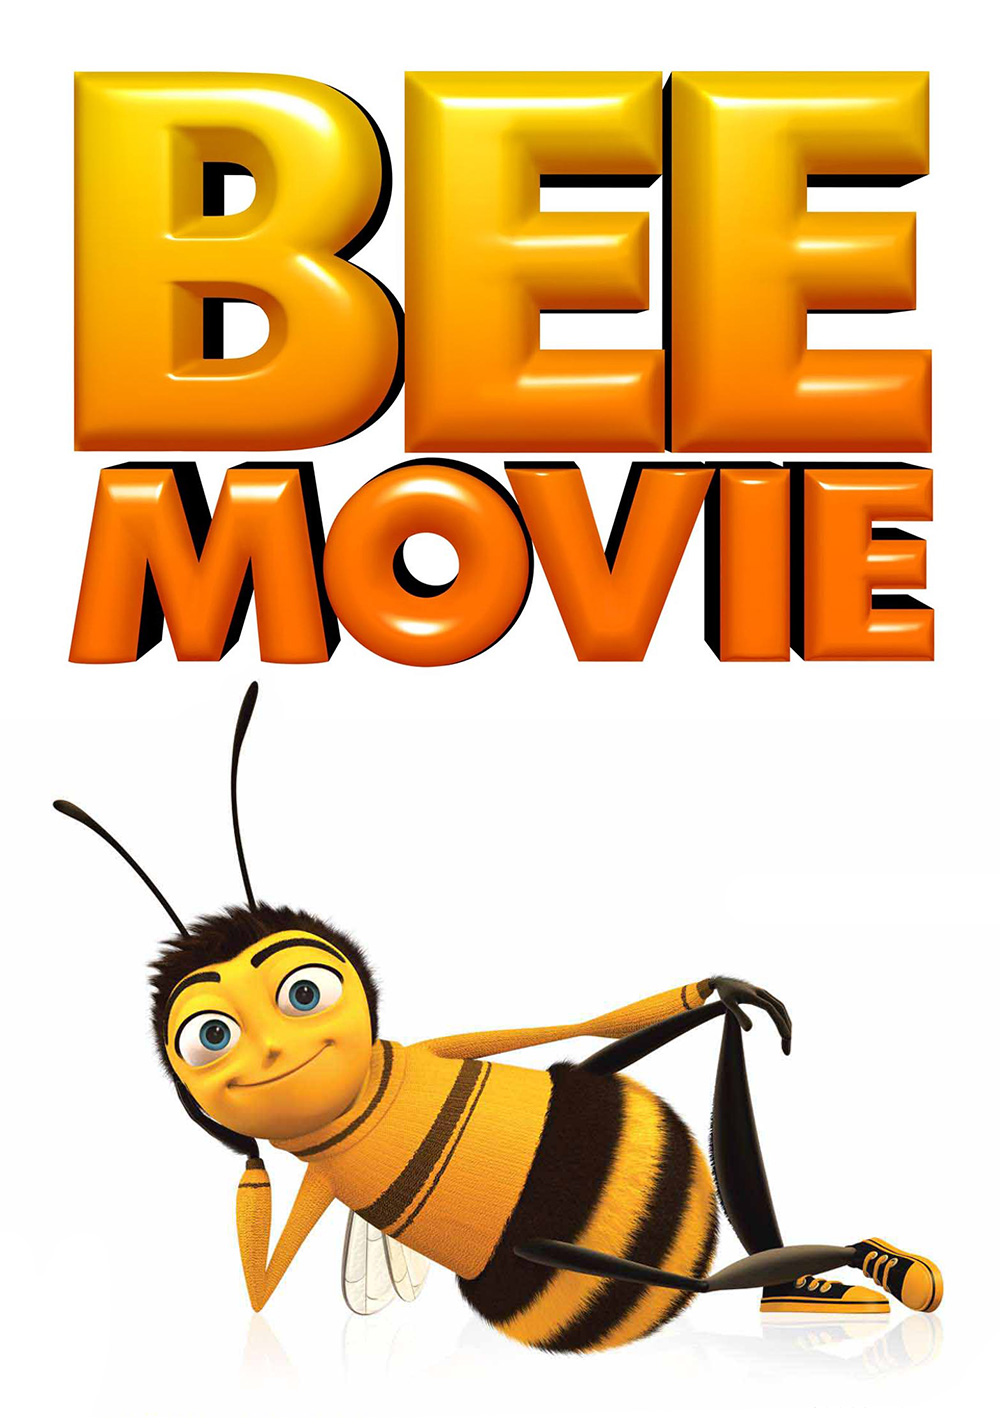 Bee Movie Movie Poster - ID: 74982 - Image Abyss.